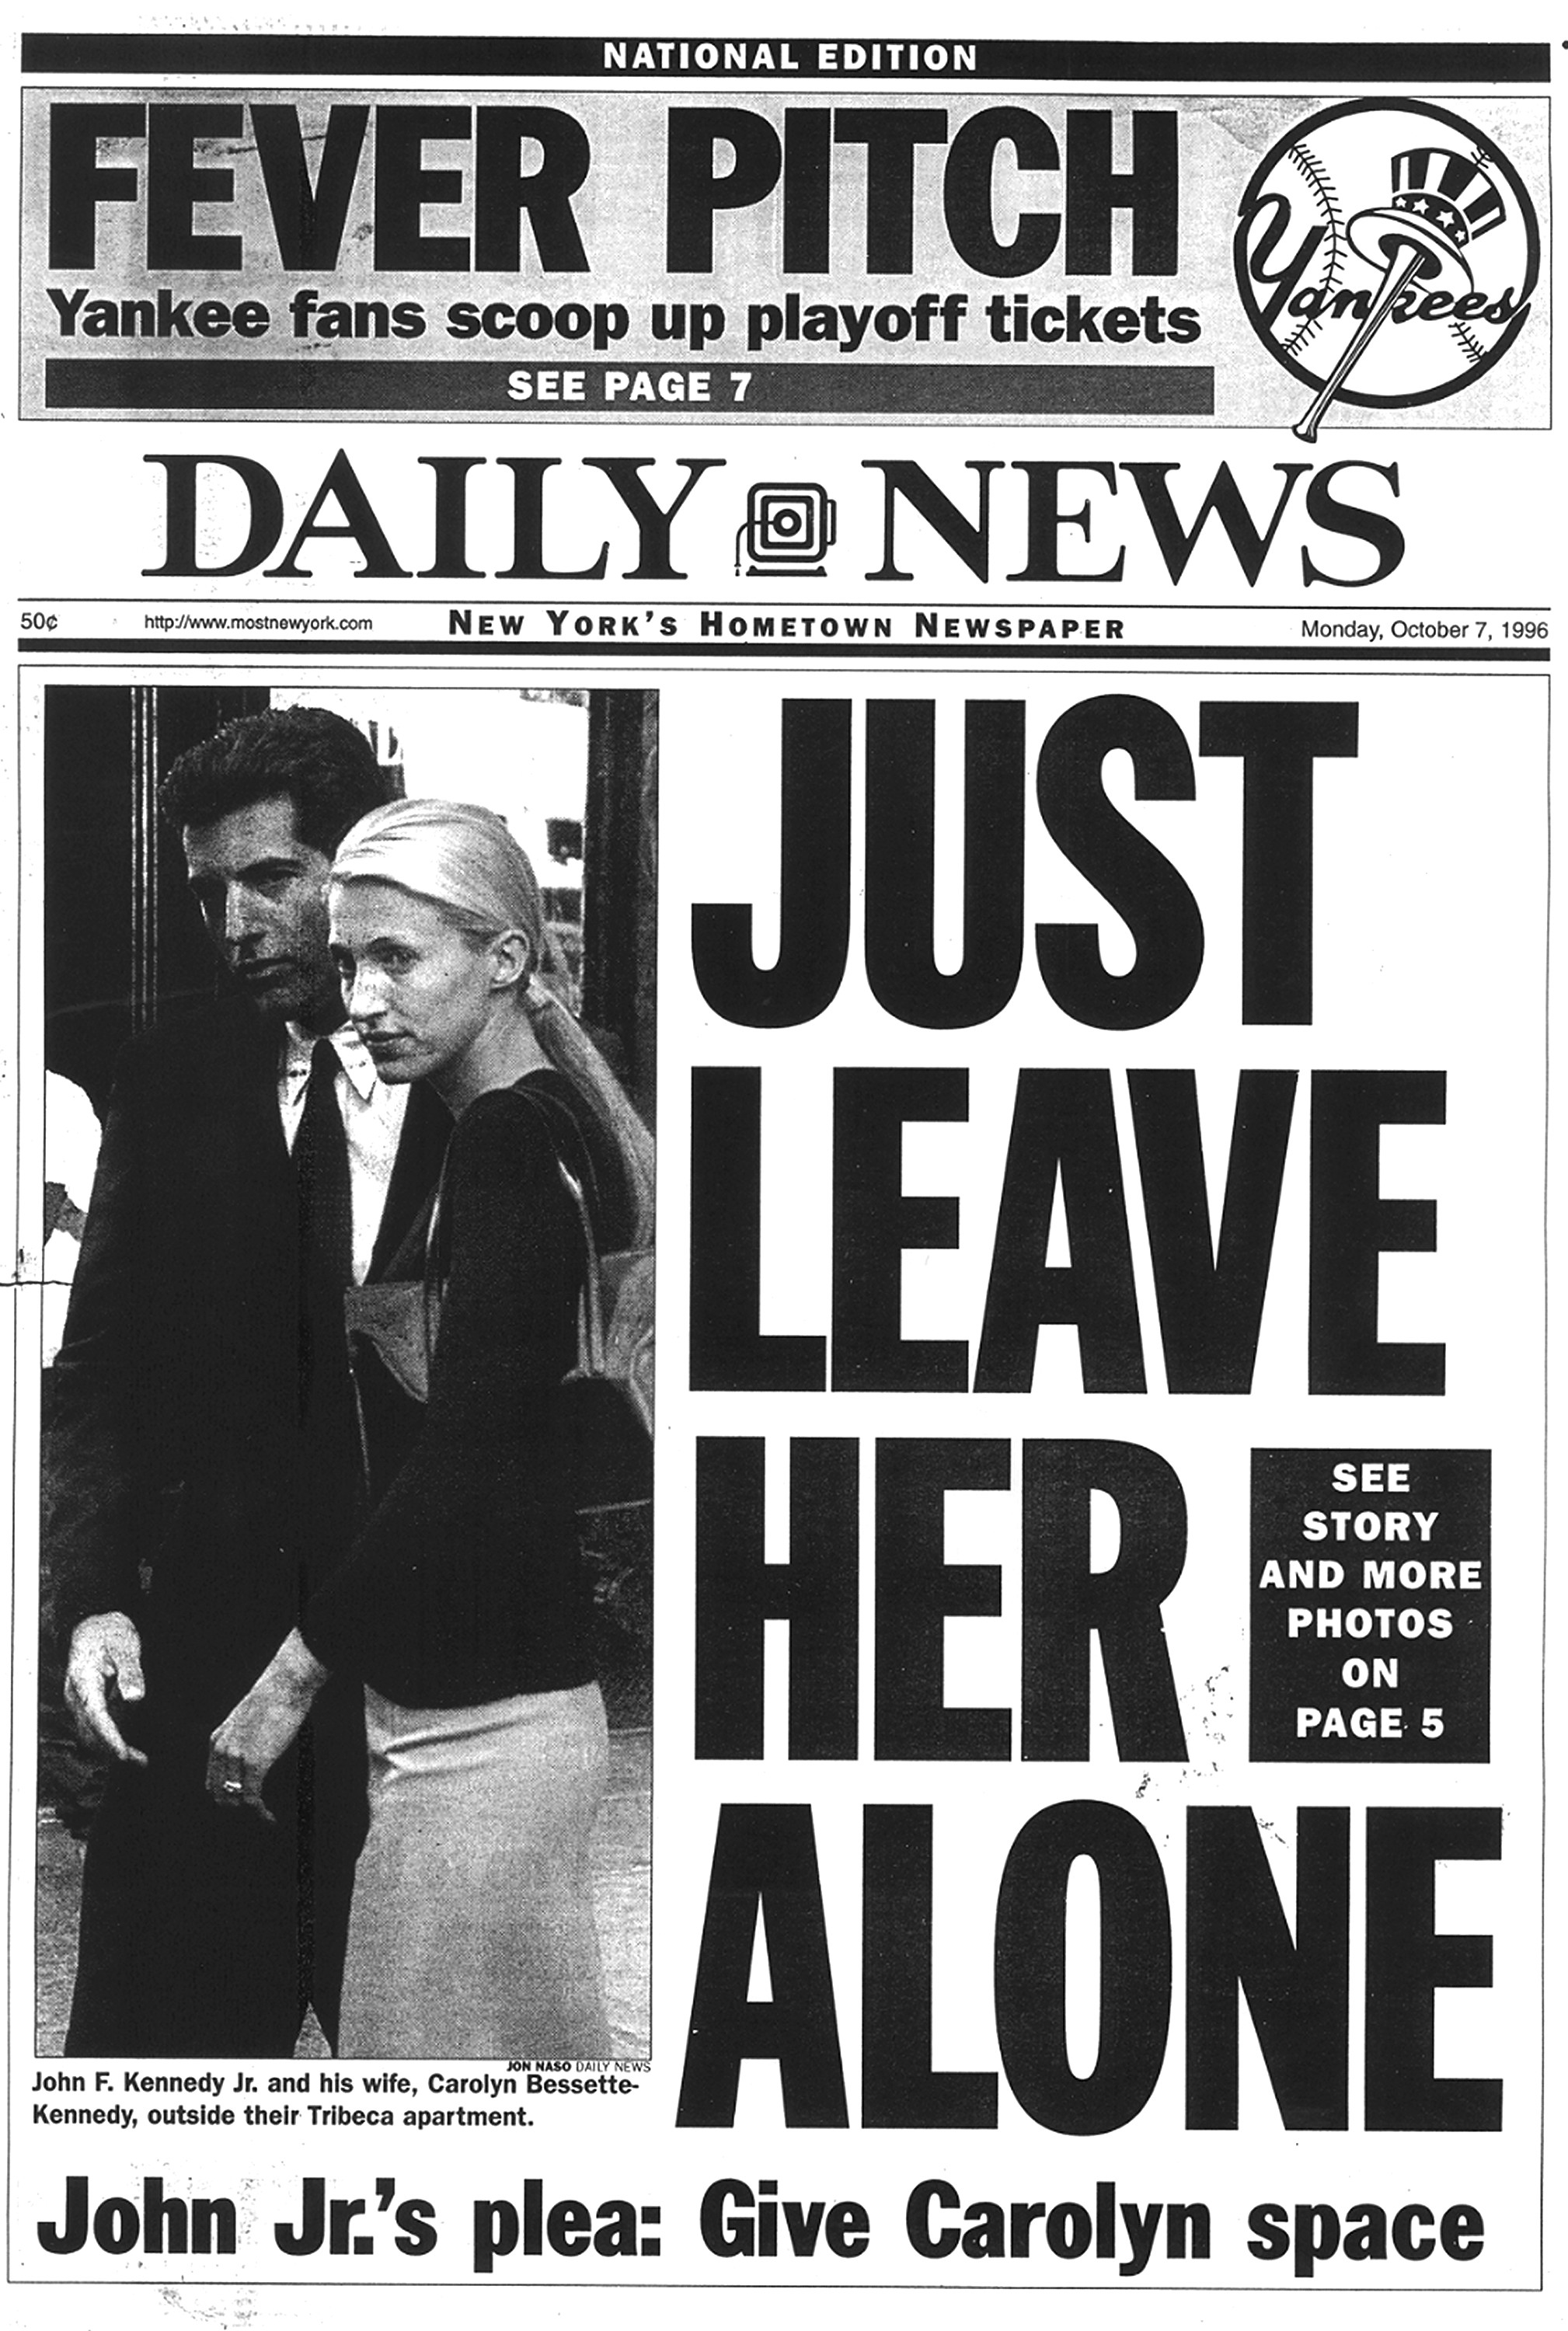 Daily News front page on Monday, October 7, 1996 featuring Kennedy's plea to the paparazzi to give his wife space | Source: Getty Images